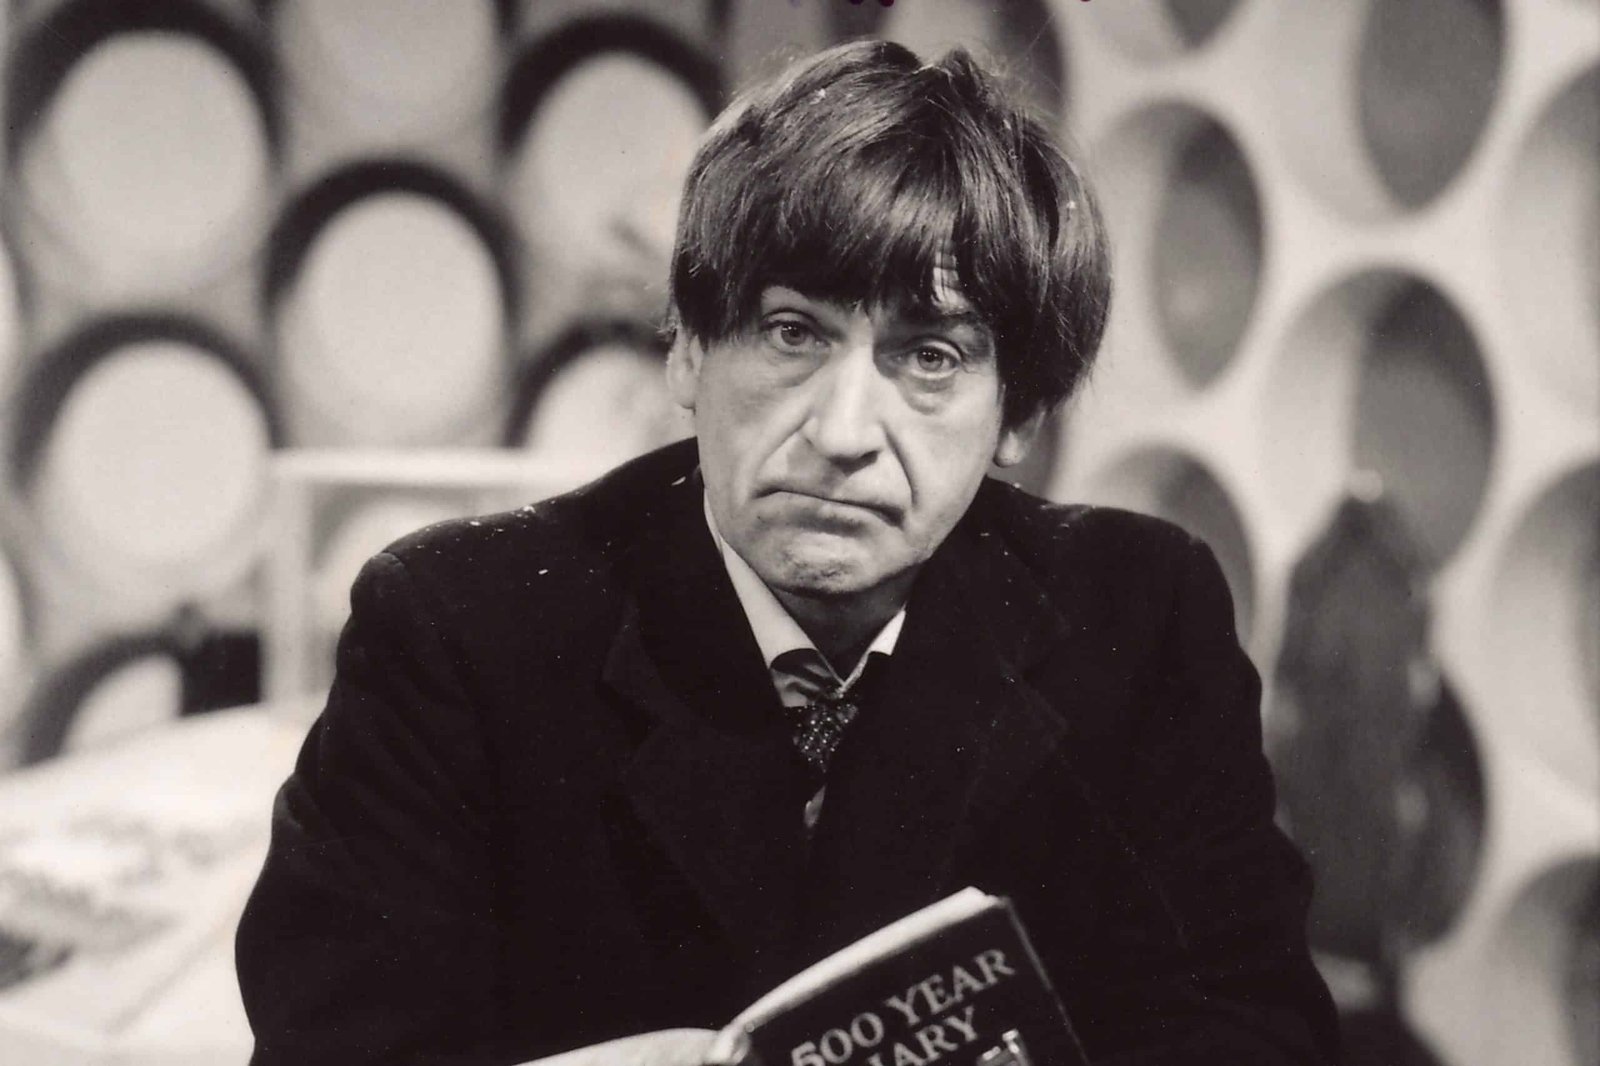 Patrick Troughton - The Second Doctor (1966-69)